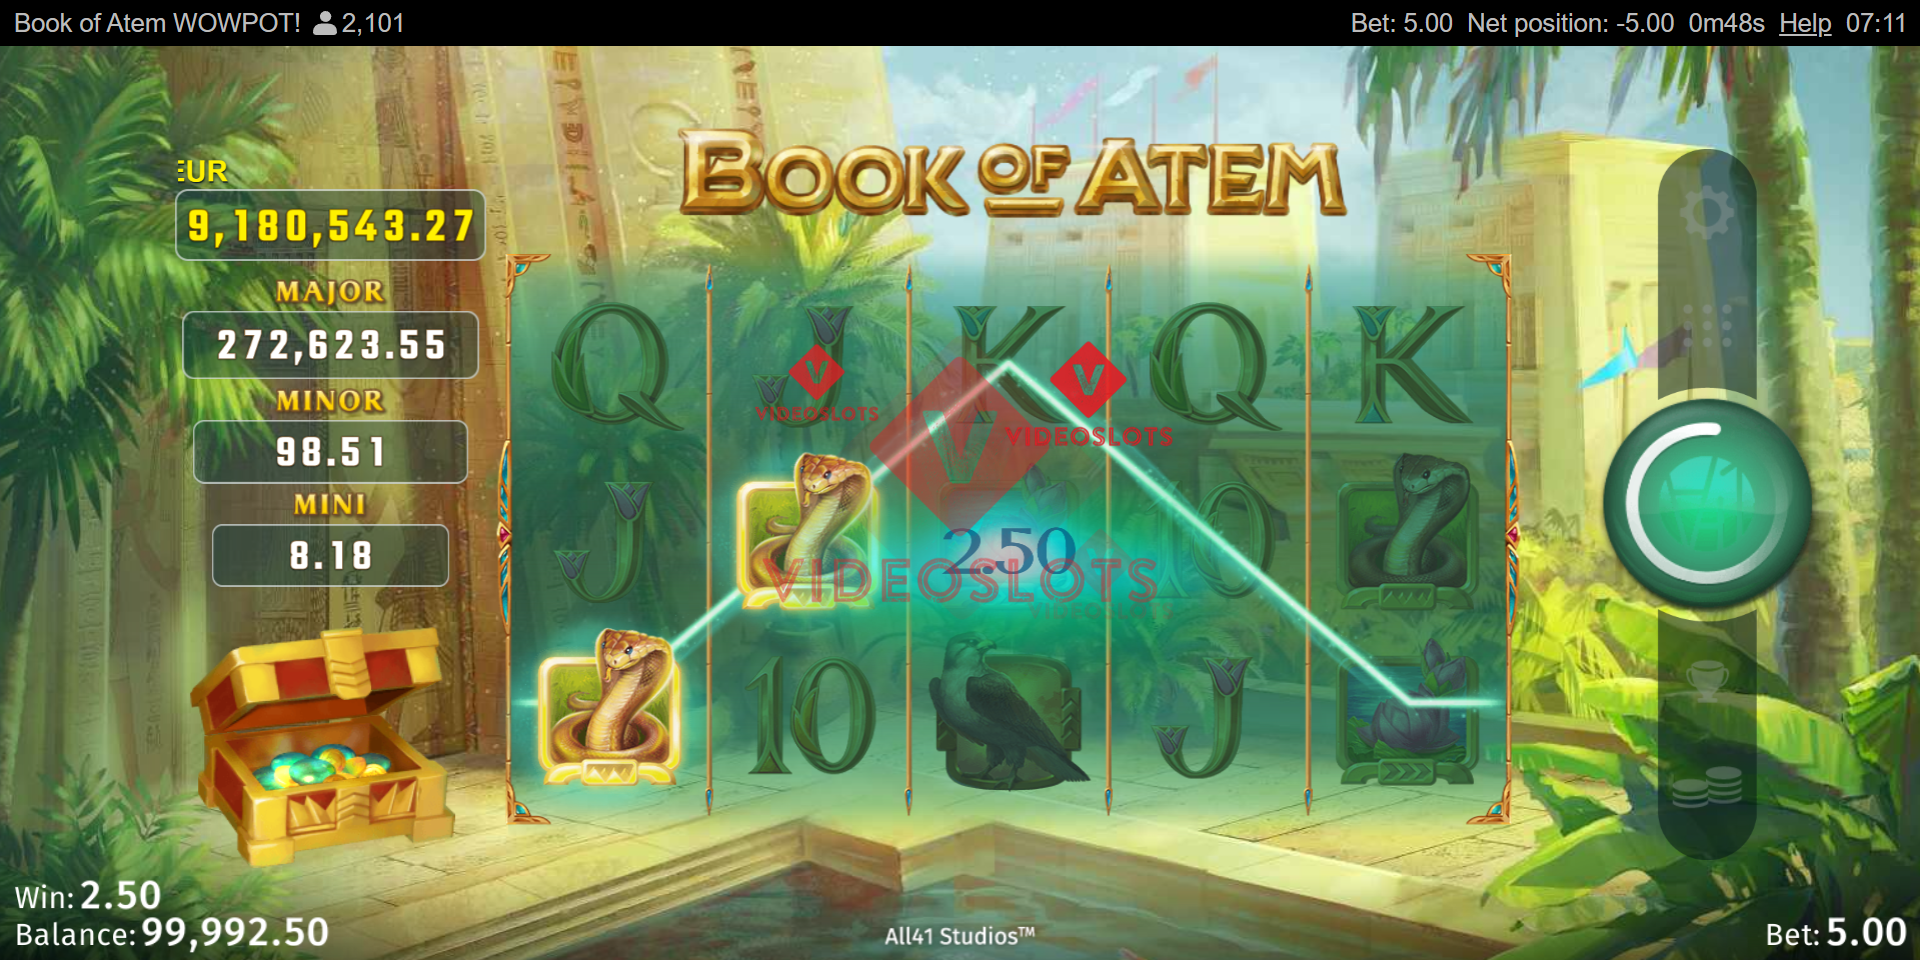 Base Game for Book of Atem WowPot slot for Microgaming